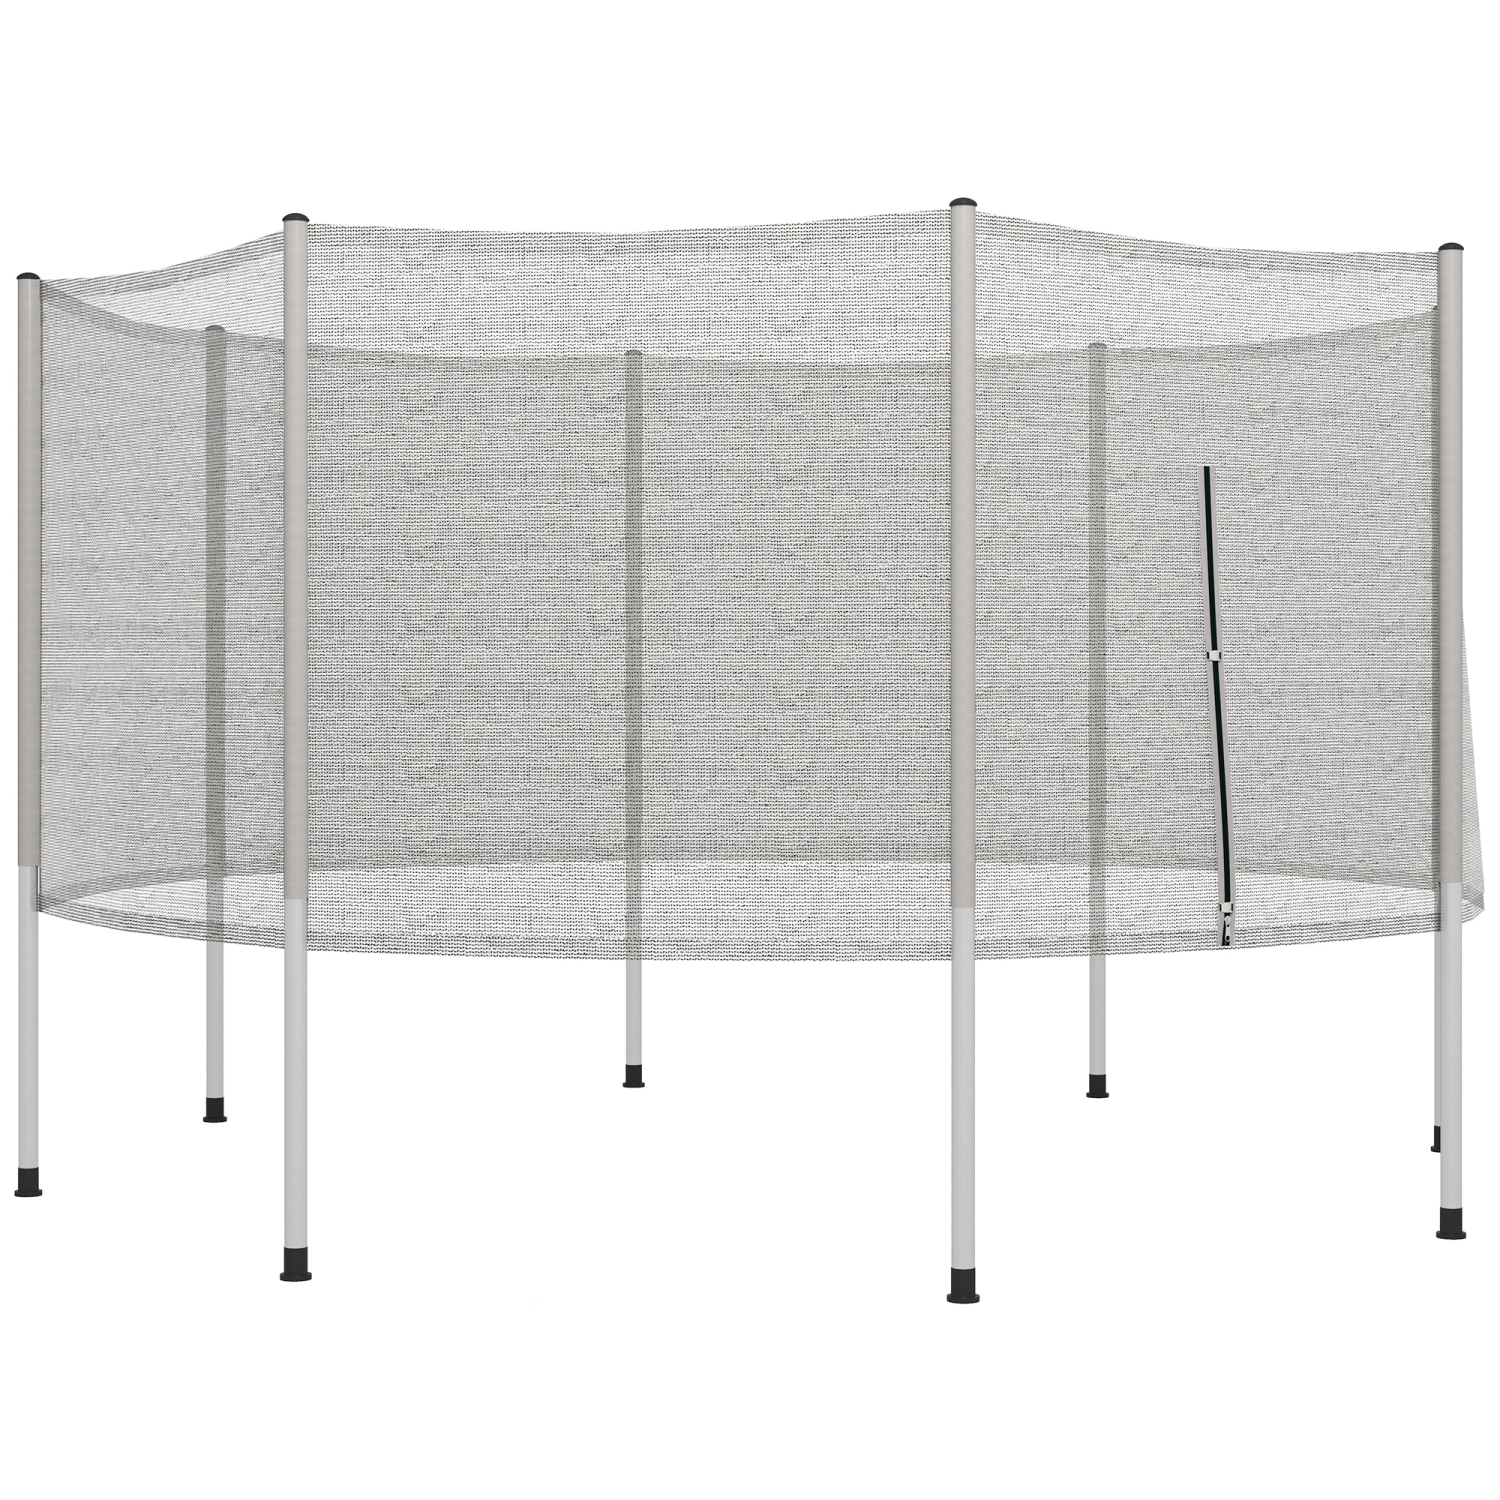 Soozier 12FT Trampoline Net Enclosure Trampolining Bounce Safety Accessories w/ 8 Poles (Net Enclosure Only), Grey